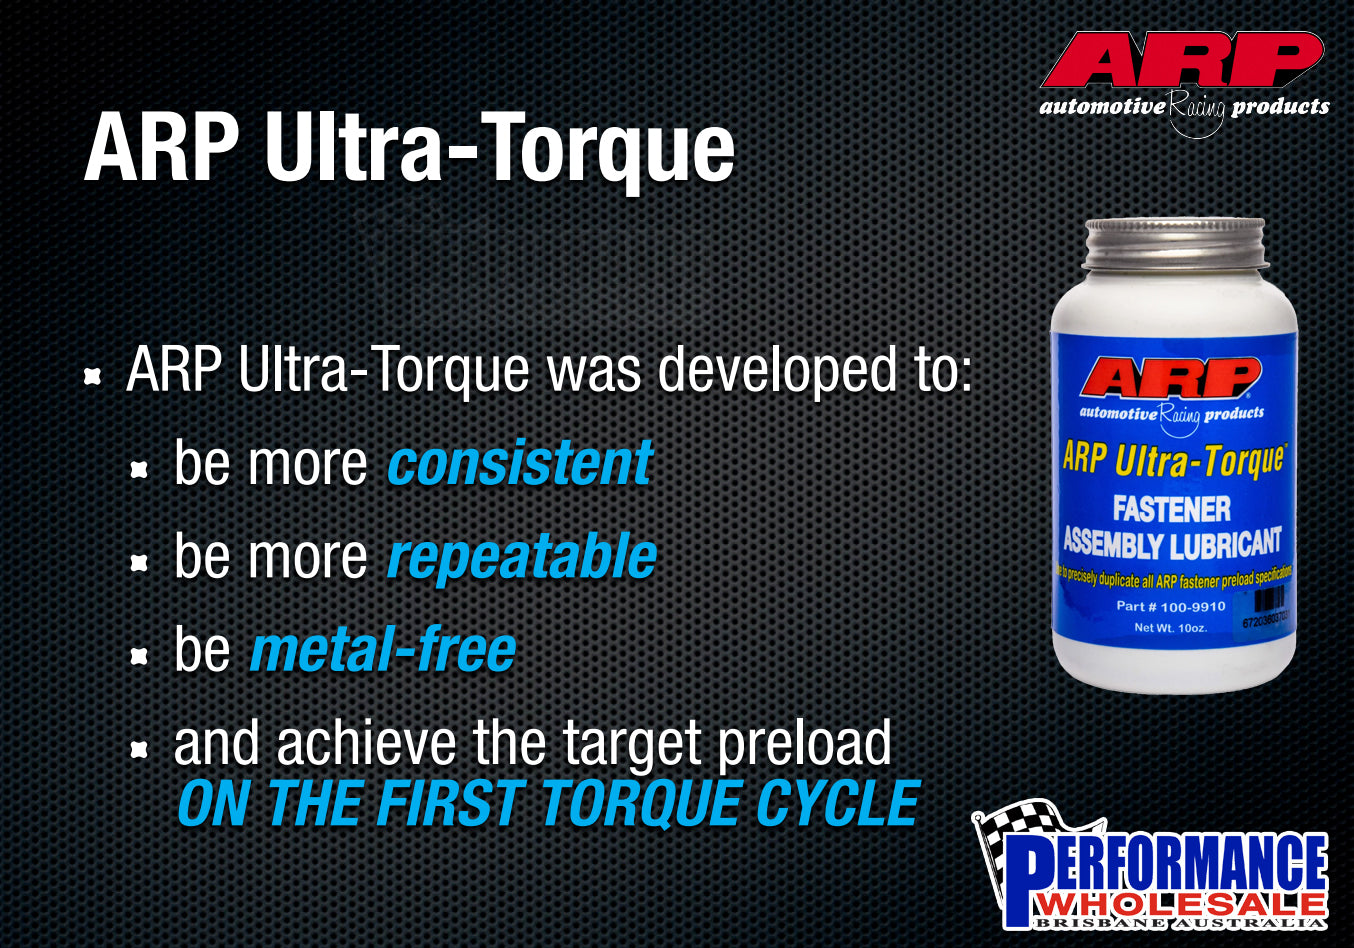 ARP Ultra Torque Assembly Lube